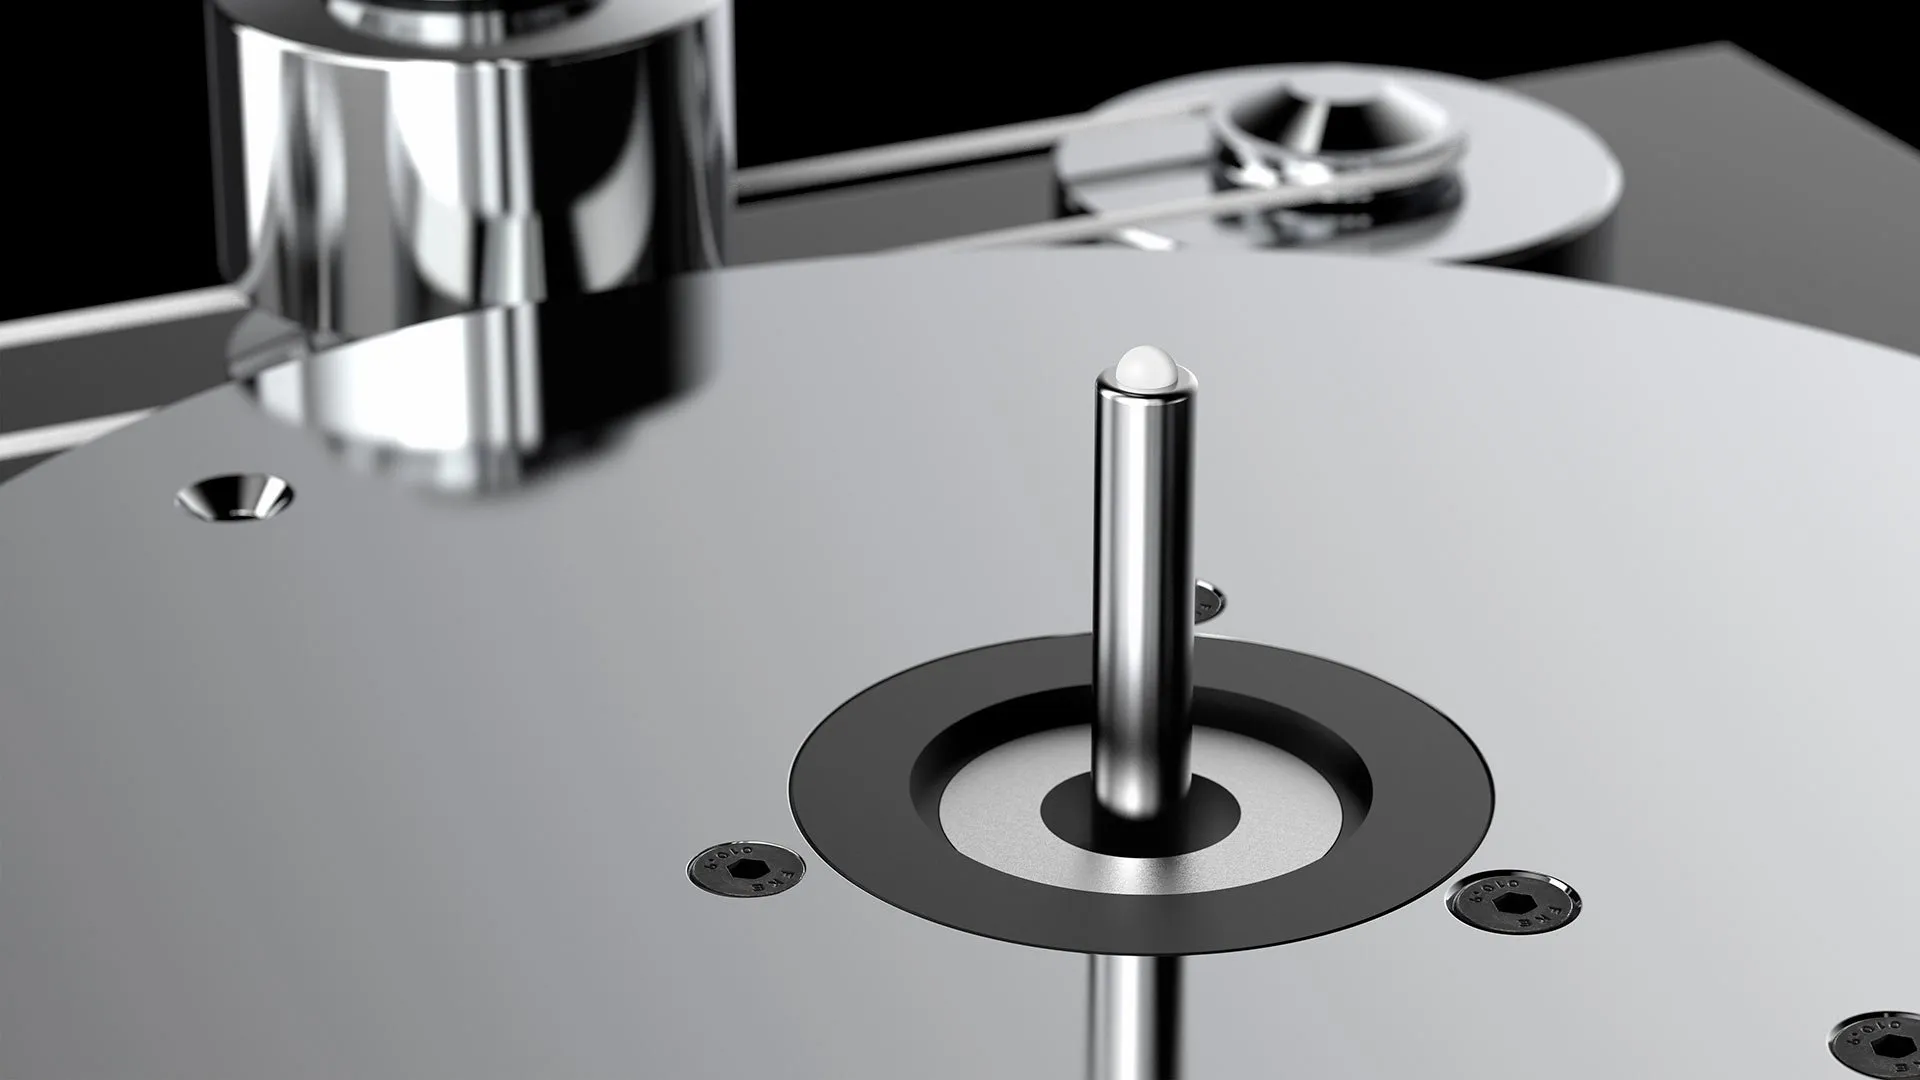 Pro-Ject Signature 12 Turntable with Inverted Ceramic Bearing